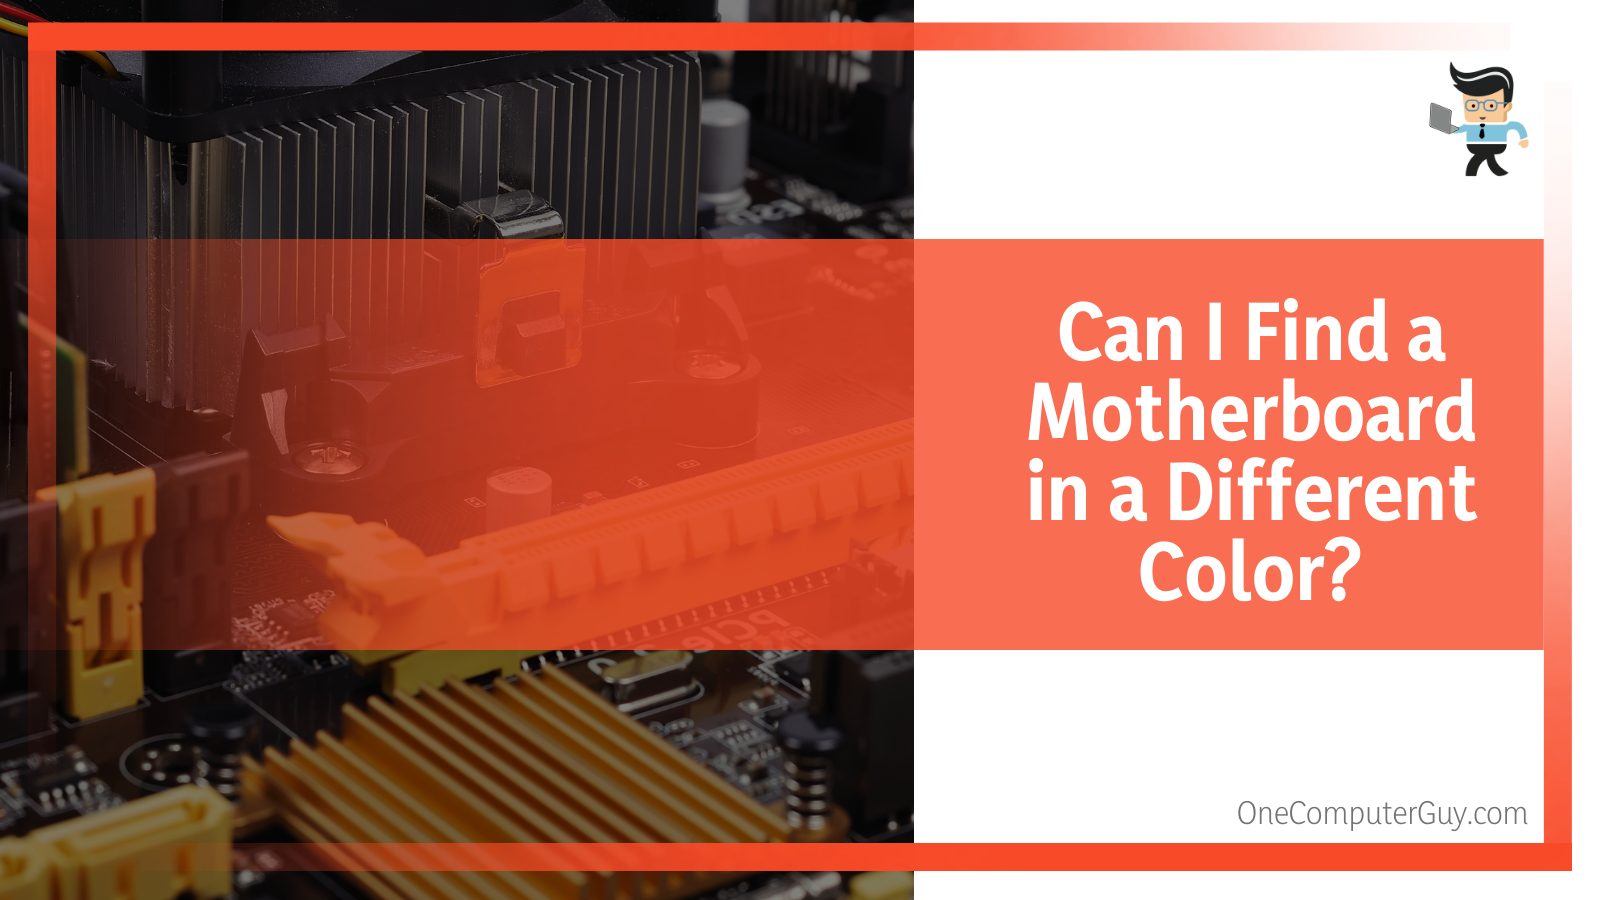 Find a Motherboard in a Different Color